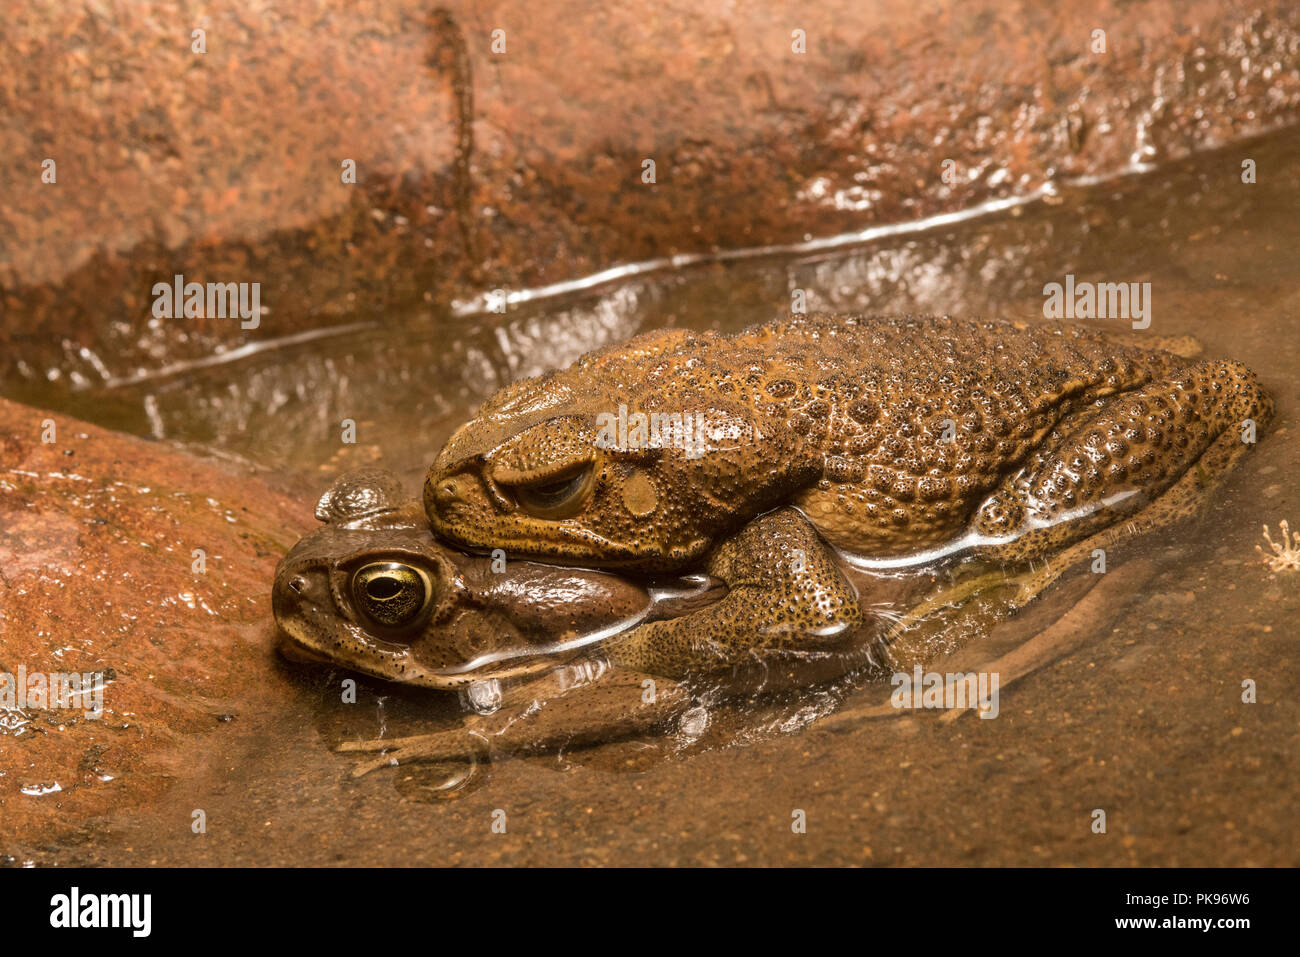 Two toads from near Manu national park in Peru.  These may be Rhinella poeppigii rather than R. marina but the 2 are visually indistinguishable. Stock Photo